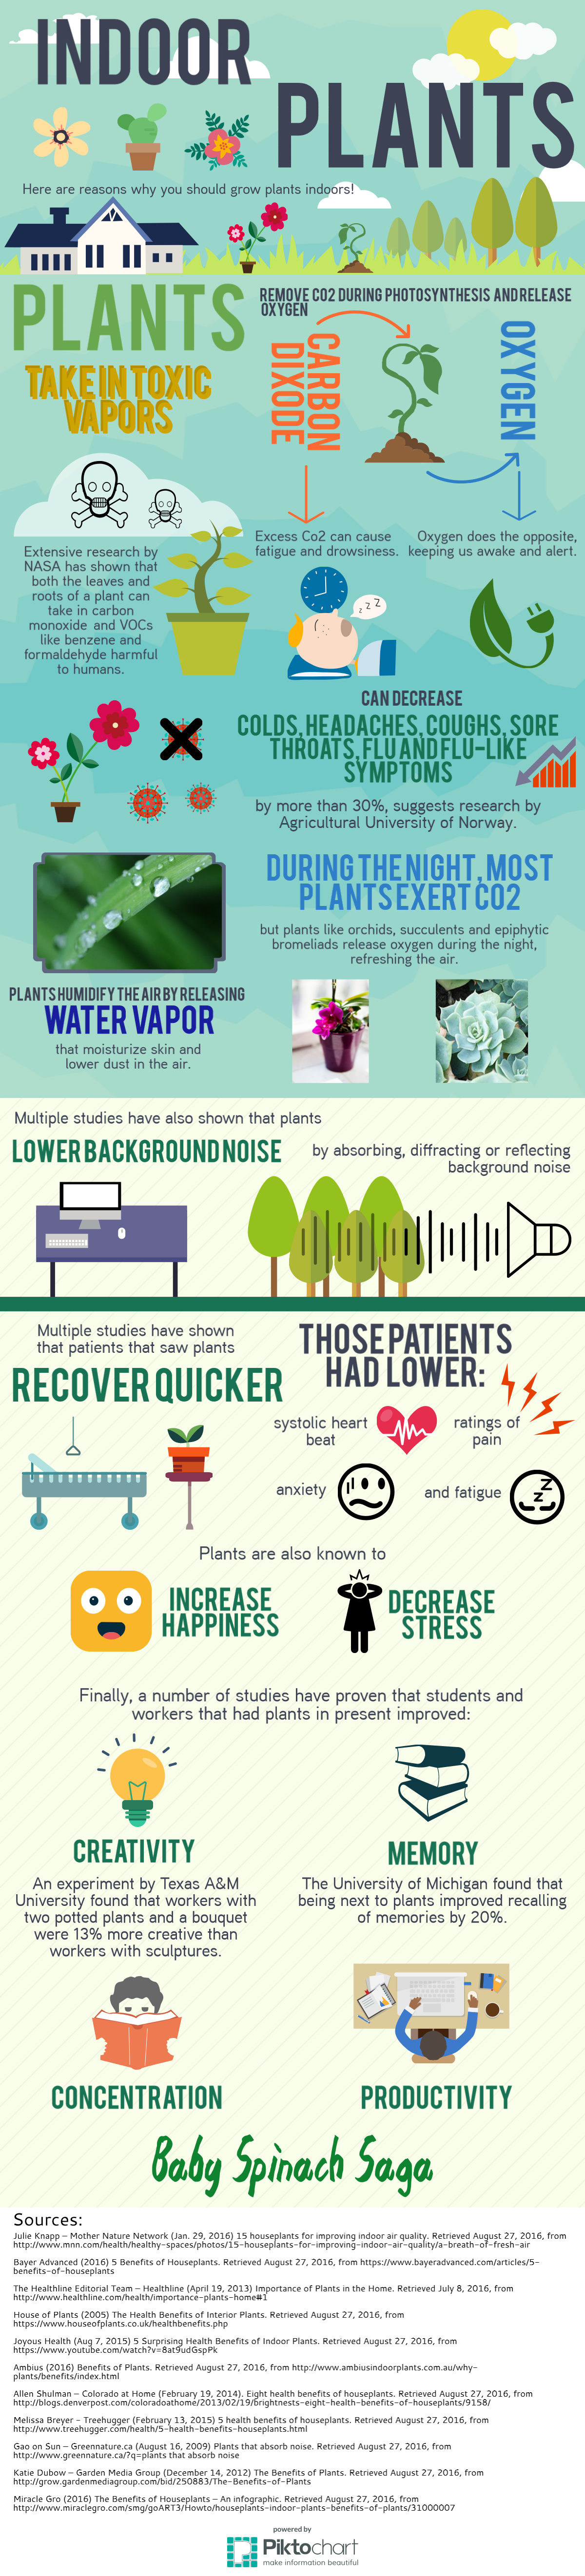 baby_spinach_saga_indoor_plants_infographic_full